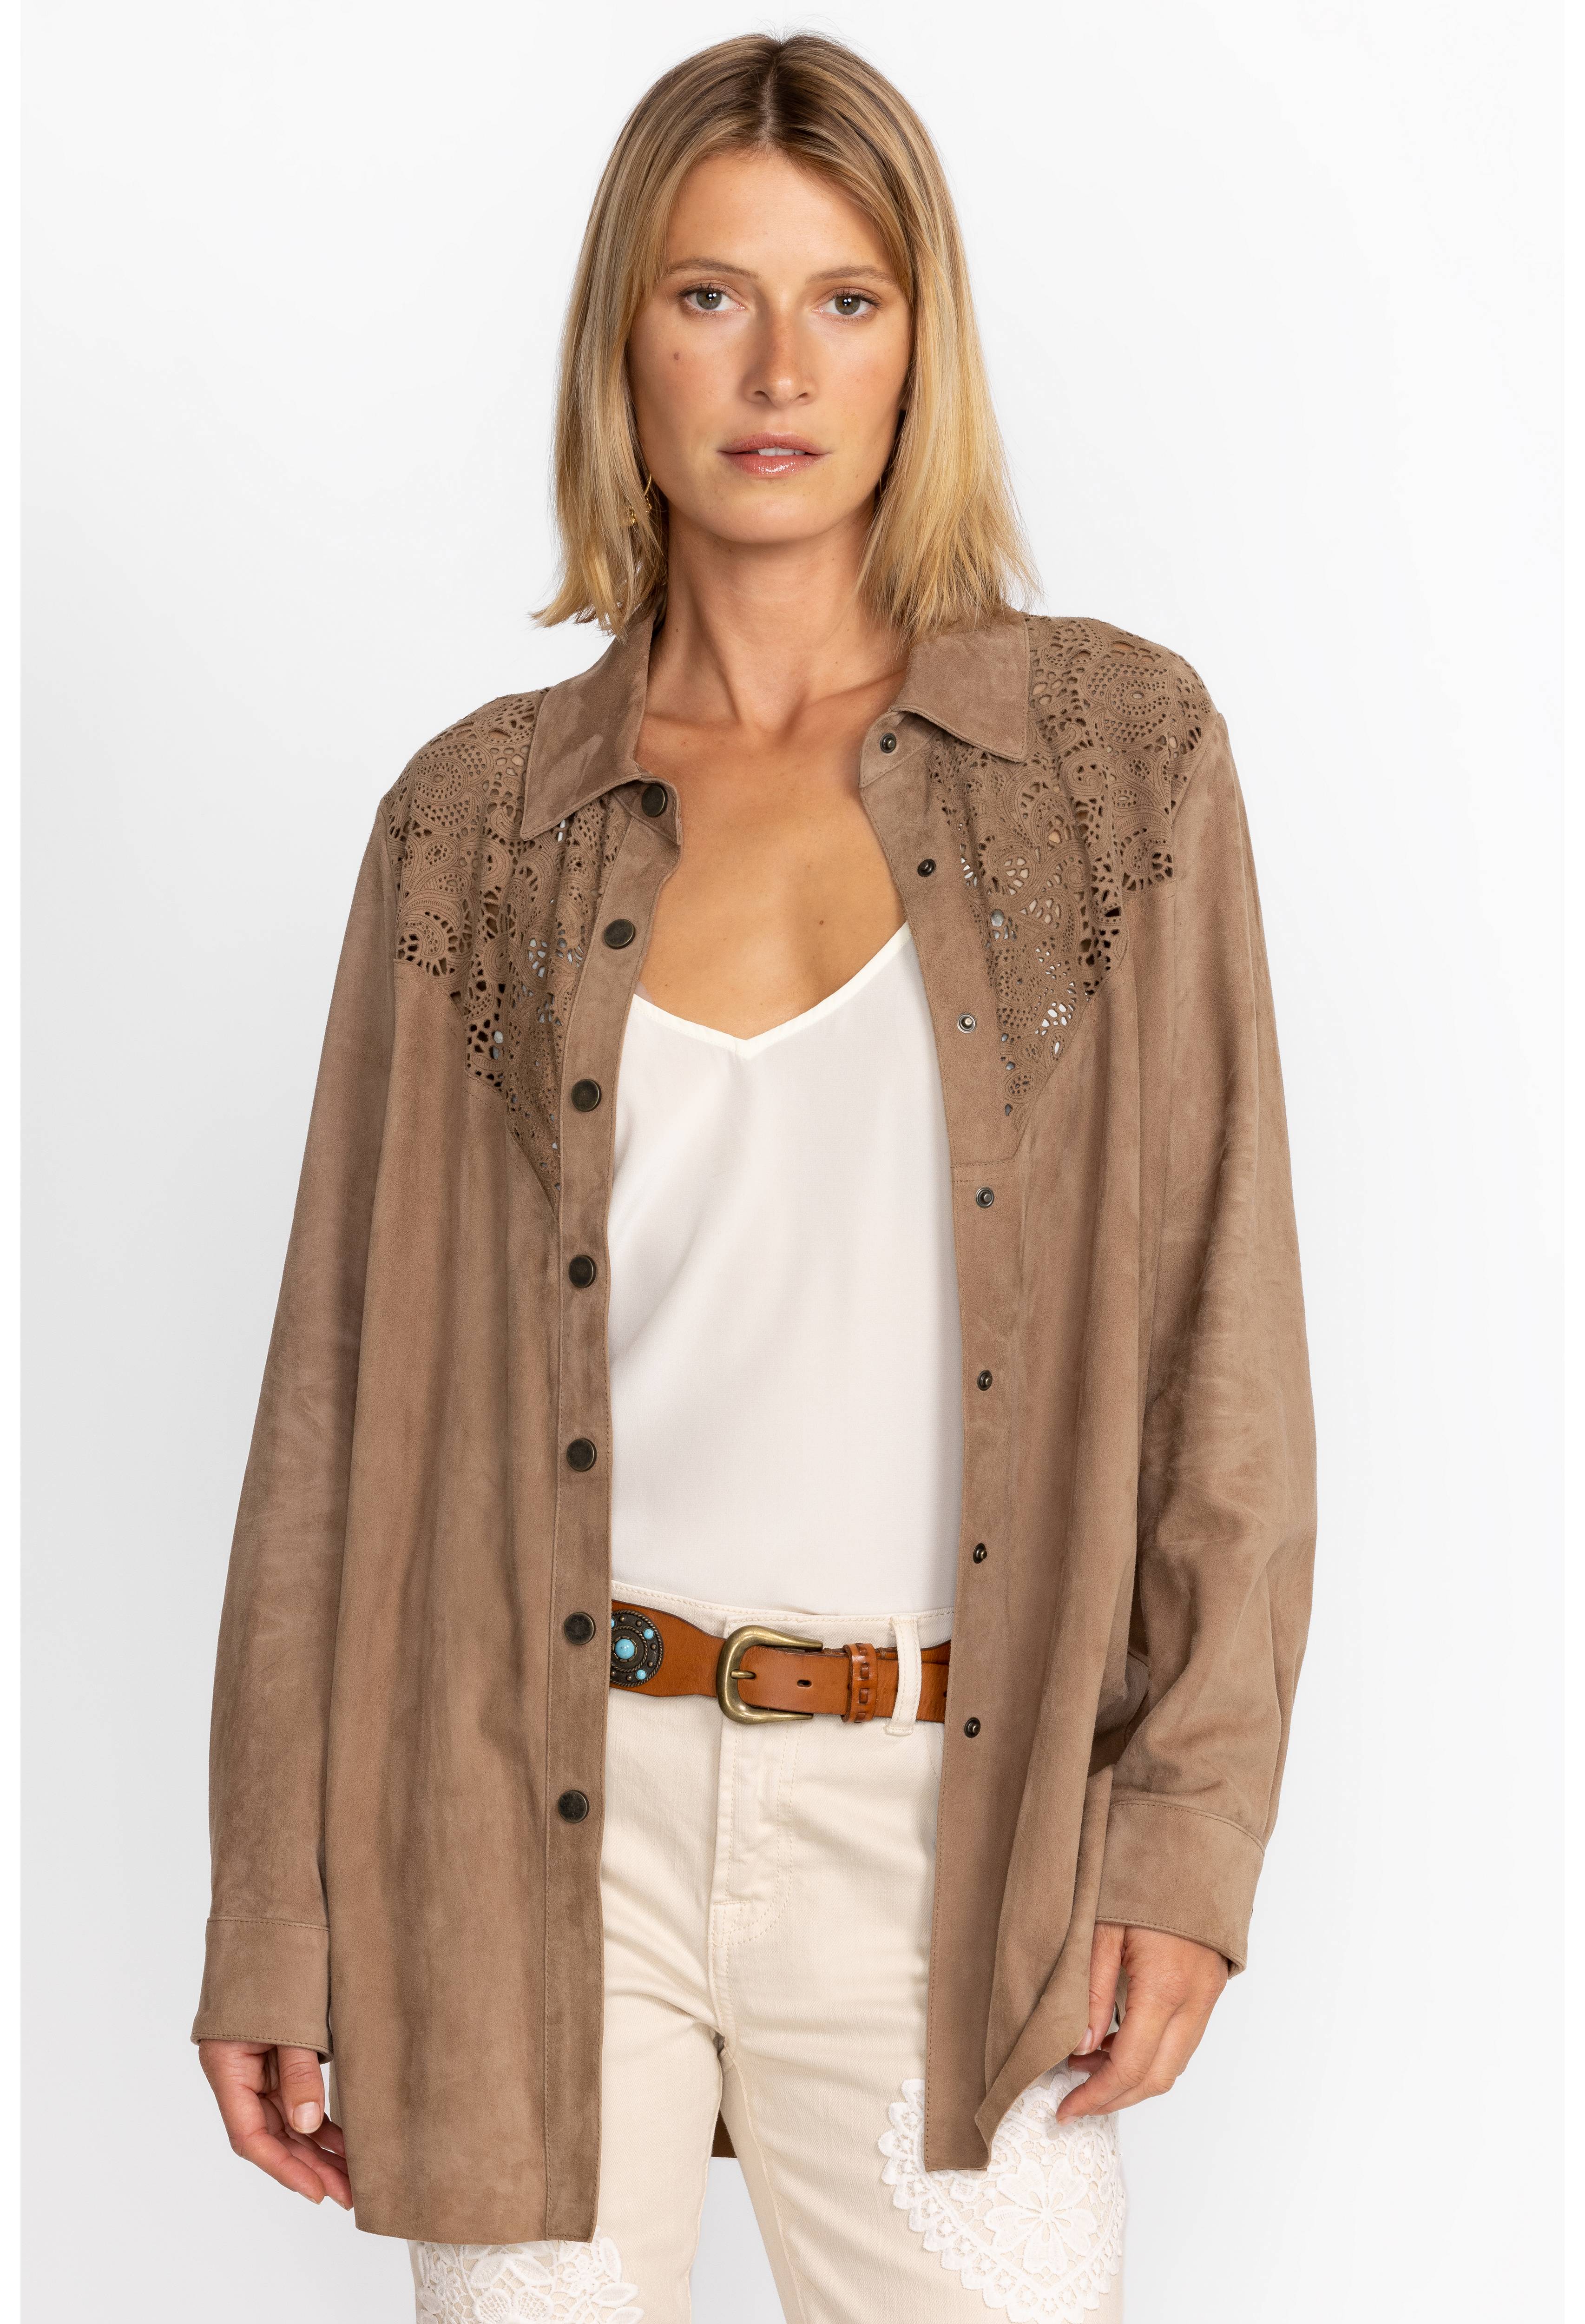 Fiore Suede Western Shacket, , large image number 3